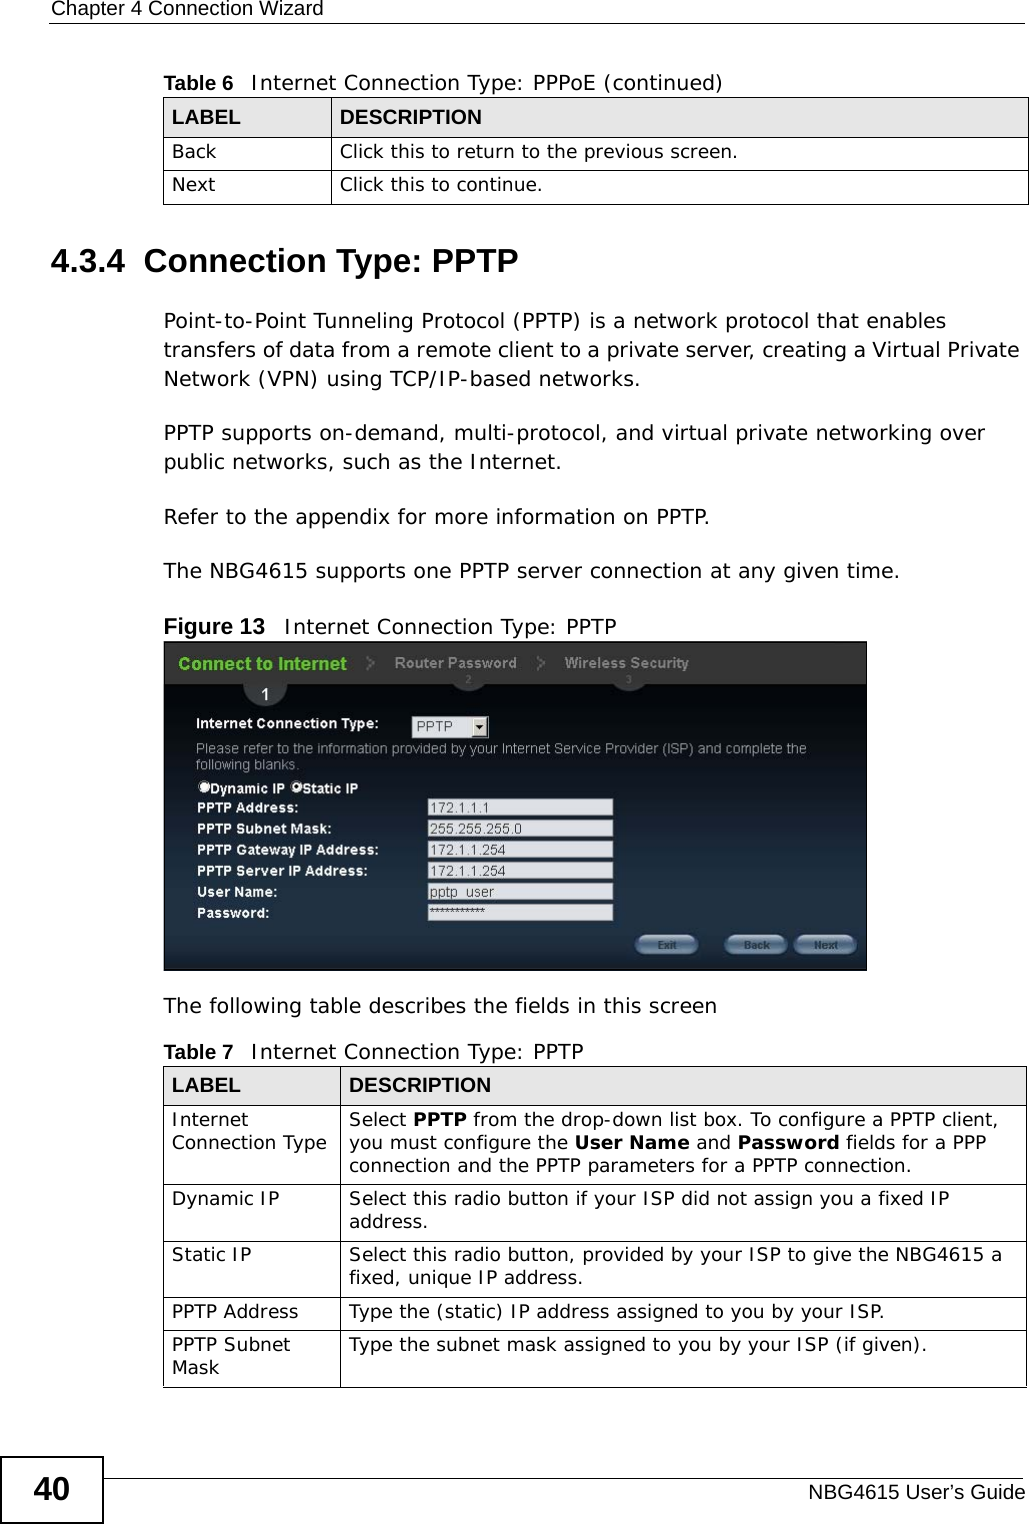 Chapter 4 Connection WizardNBG4615 User’s Guide404.3.4  Connection Type: PPTPPoint-to-Point Tunneling Protocol (PPTP) is a network protocol that enables transfers of data from a remote client to a private server, creating a Virtual Private Network (VPN) using TCP/IP-based networks.PPTP supports on-demand, multi-protocol, and virtual private networking over public networks, such as the Internet.Refer to the appendix for more information on PPTP.The NBG4615 supports one PPTP server connection at any given time.Figure 13   Internet Connection Type: PPTP The following table describes the fields in this screenBack Click this to return to the previous screen.Next Click this to continue. Table 6   Internet Connection Type: PPPoE (continued)LABEL DESCRIPTIONTable 7   Internet Connection Type: PPTPLABEL DESCRIPTIONInternet Connection Type Select PPTP from the drop-down list box. To configure a PPTP client, you must configure the User Name and Password fields for a PPP connection and the PPTP parameters for a PPTP connection.Dynamic IP Select this radio button if your ISP did not assign you a fixed IP address.Static IP Select this radio button, provided by your ISP to give the NBG4615 a fixed, unique IP address.PPTP Address Type the (static) IP address assigned to you by your ISP.PPTP Subnet Mask Type the subnet mask assigned to you by your ISP (if given).